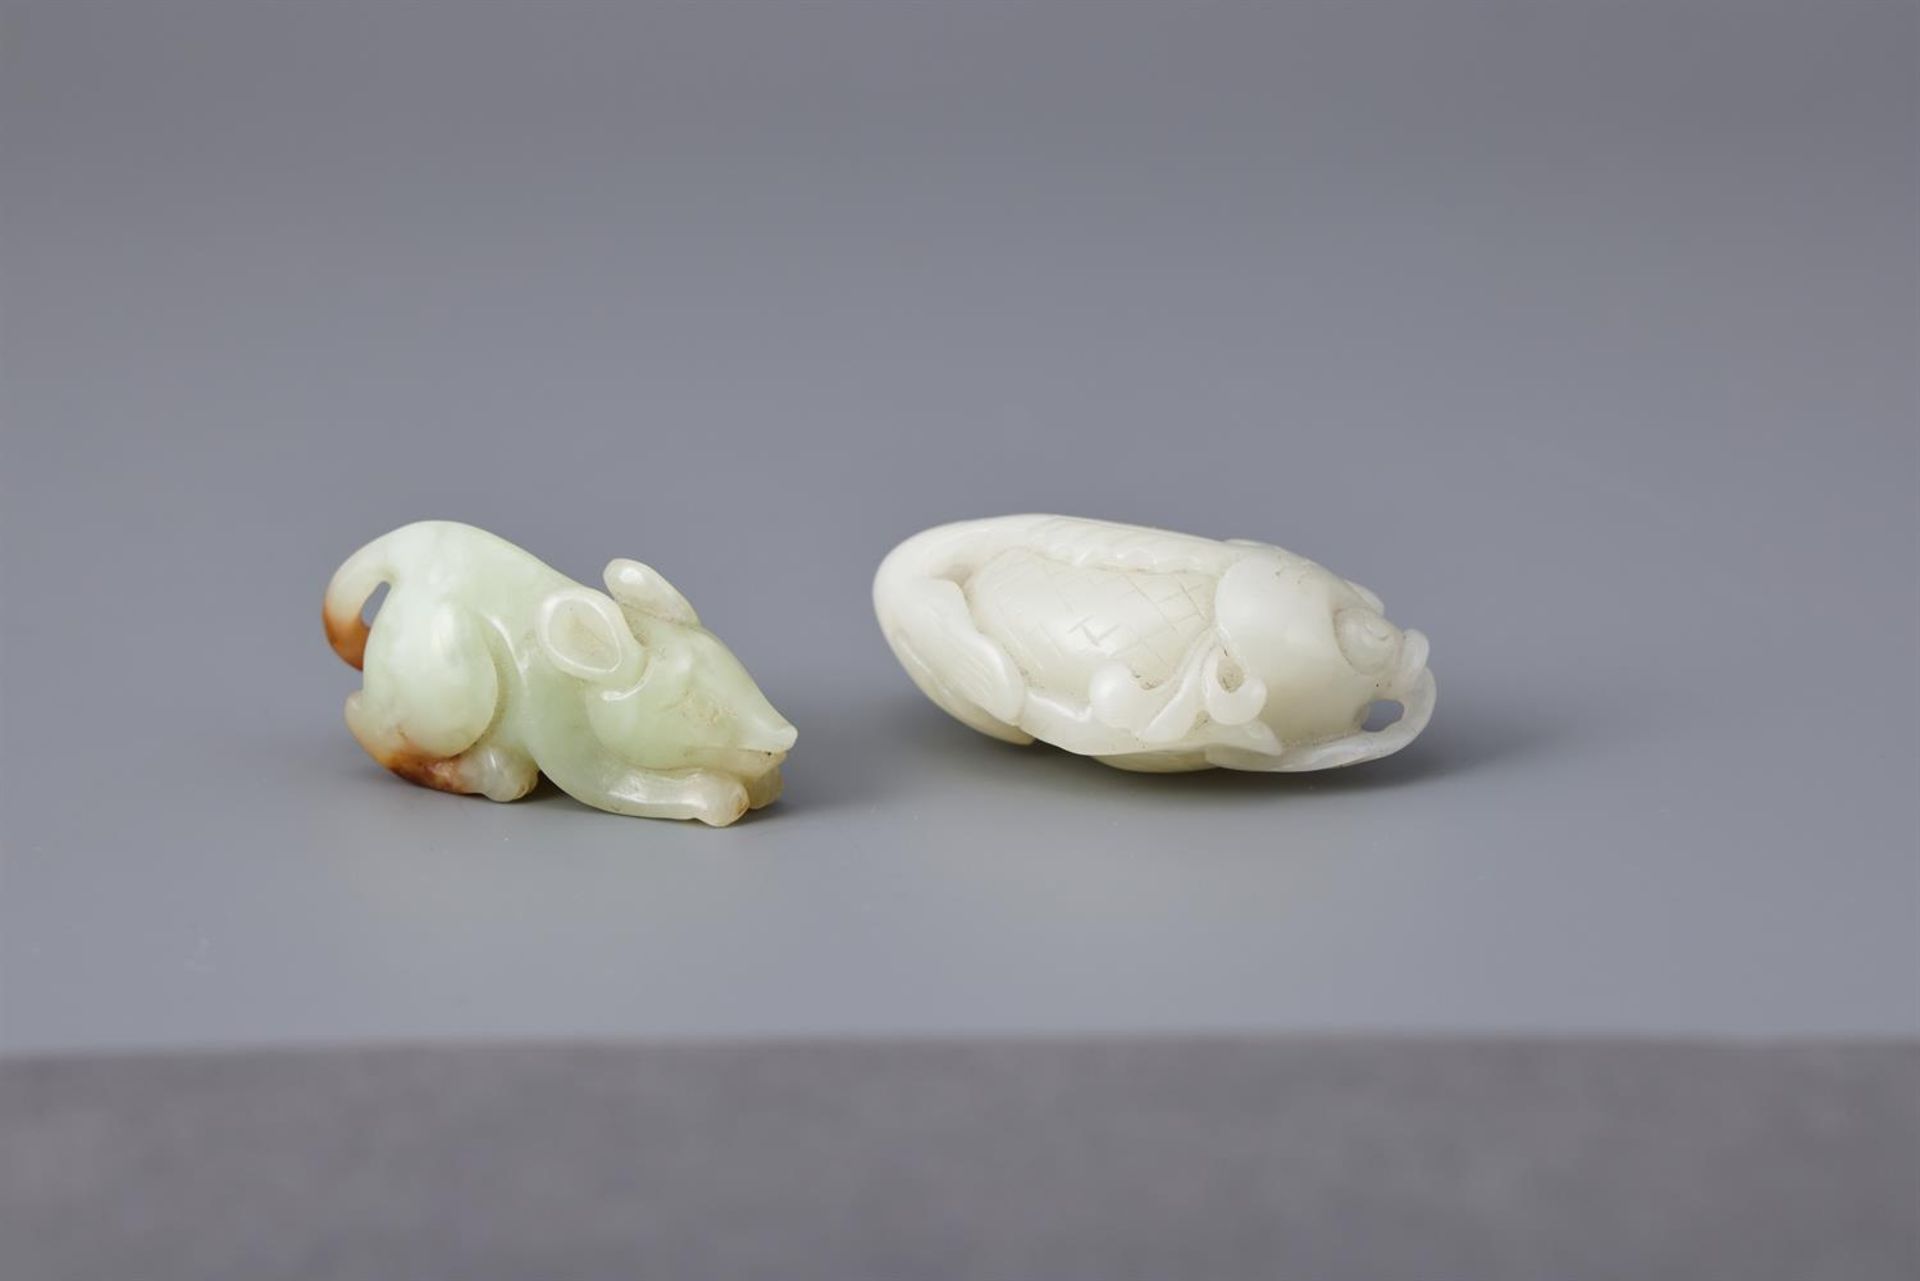 A Chinese white jade carving of goldfish - Image 3 of 3